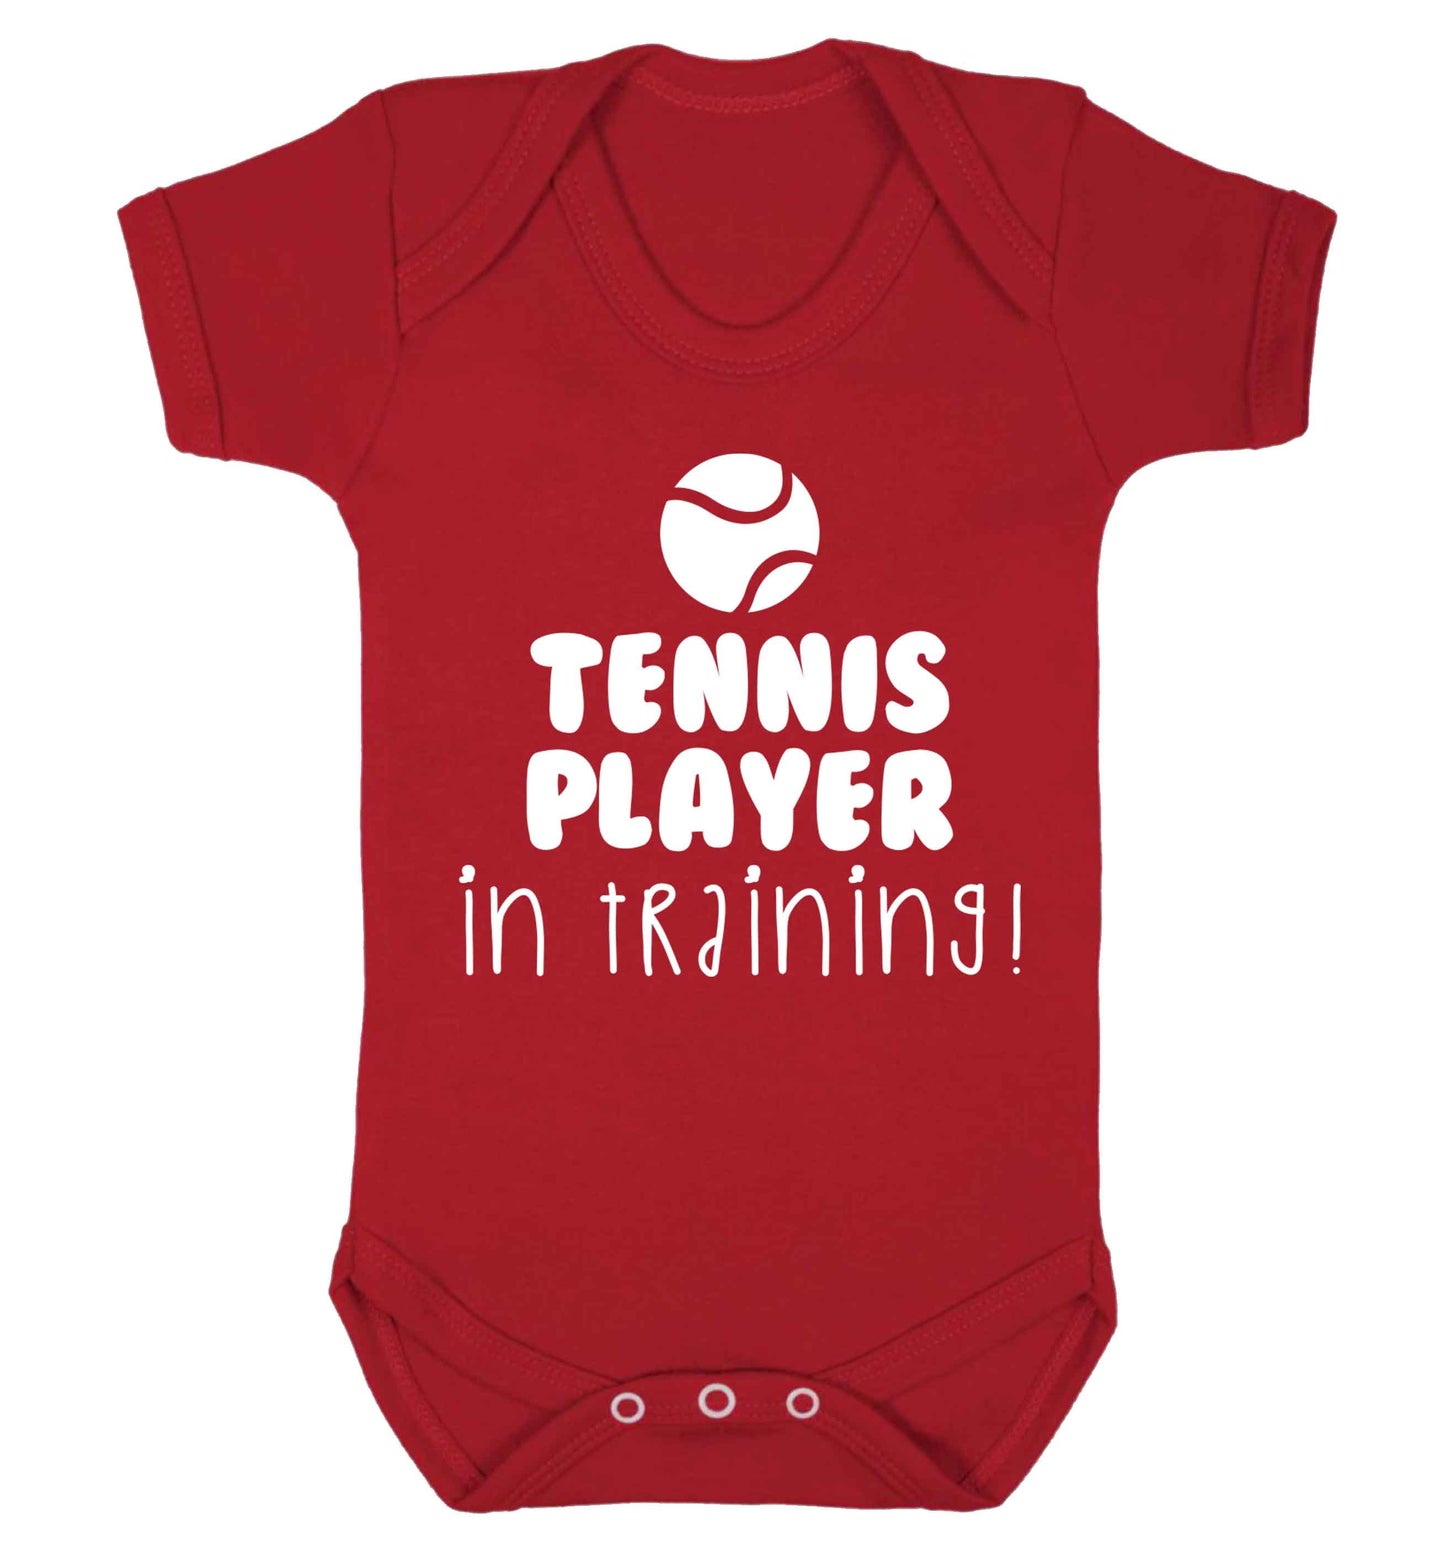 Tennis player in training Baby Vest red 18-24 months